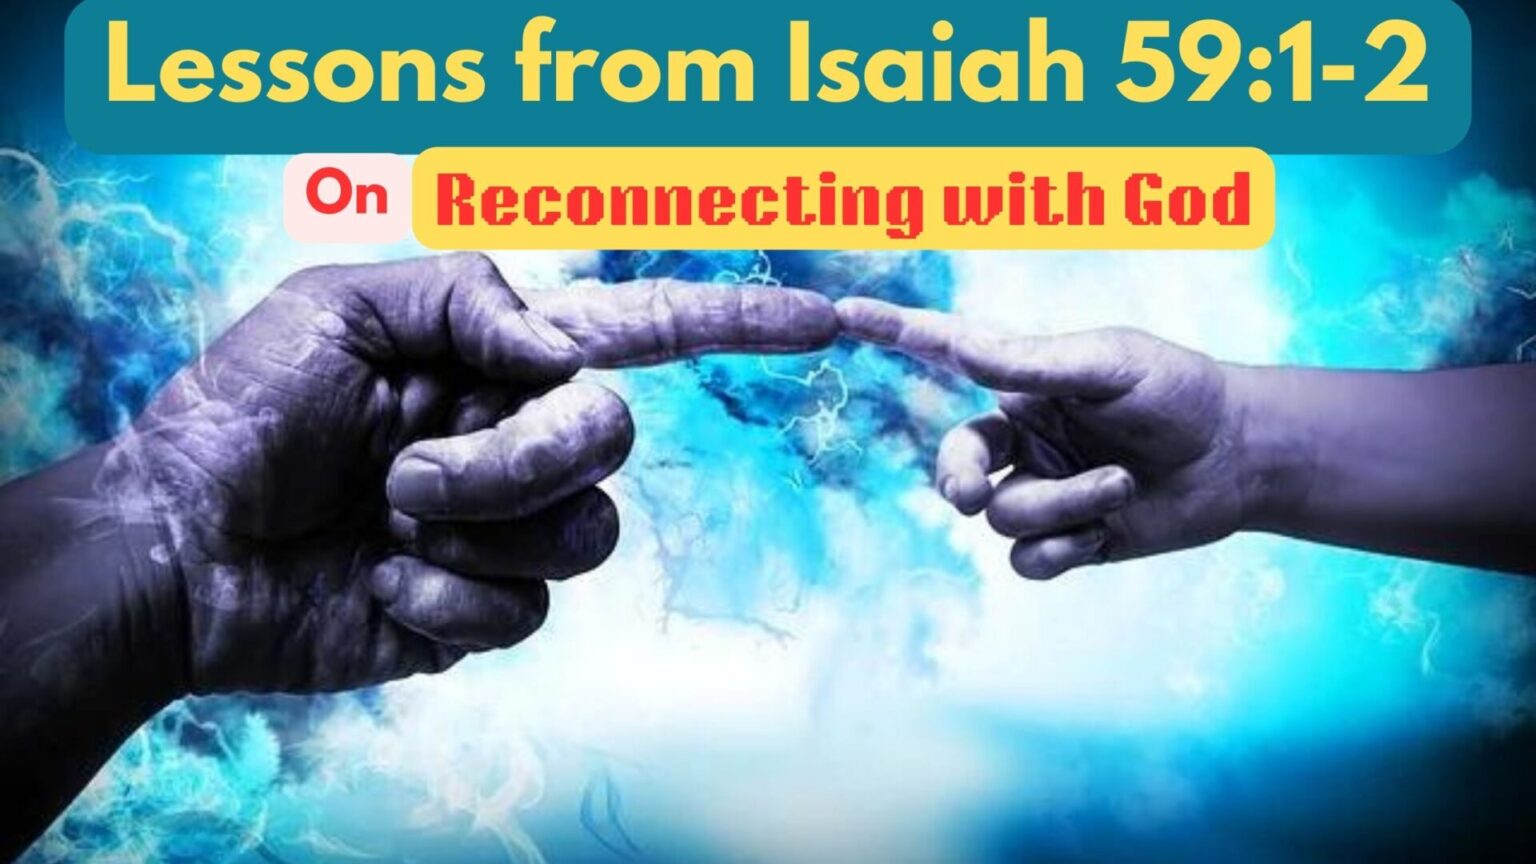 Lessons from Isaiah 59:1-2 on Reconnecting with God